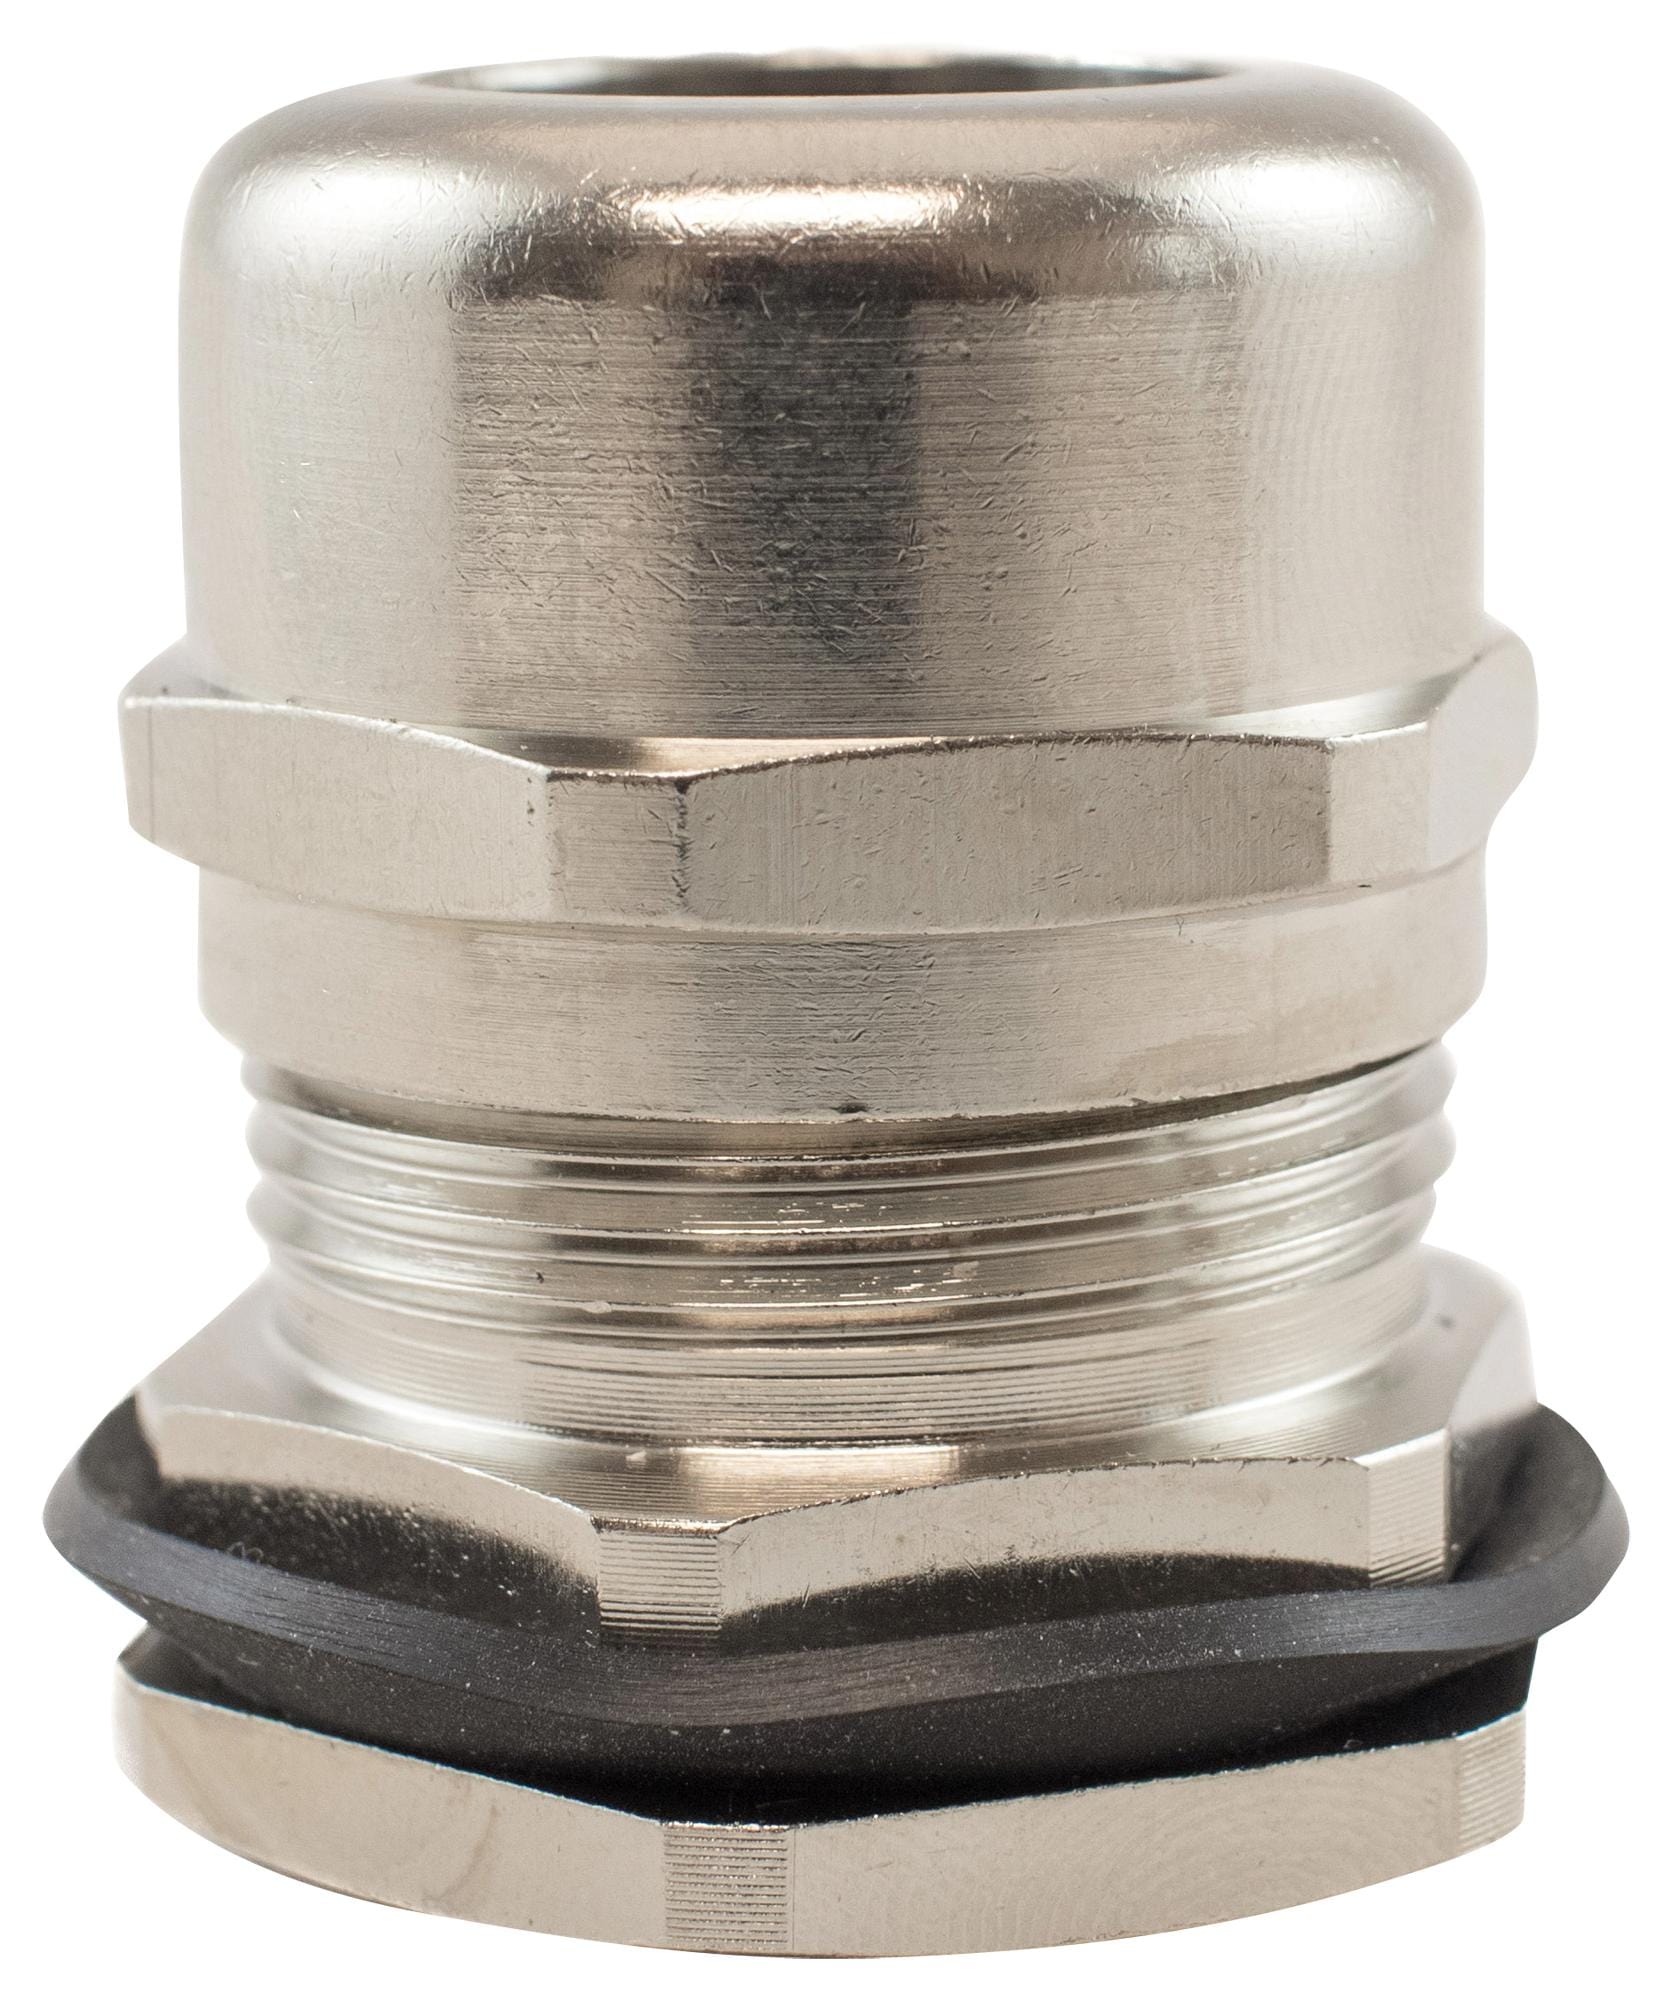 ALPHA WIRE Glands MPG29 NC080 CABLE GLAND, PG29, BRASS, 18-25MM ALPHA WIRE 2891965 MPG29 NC080